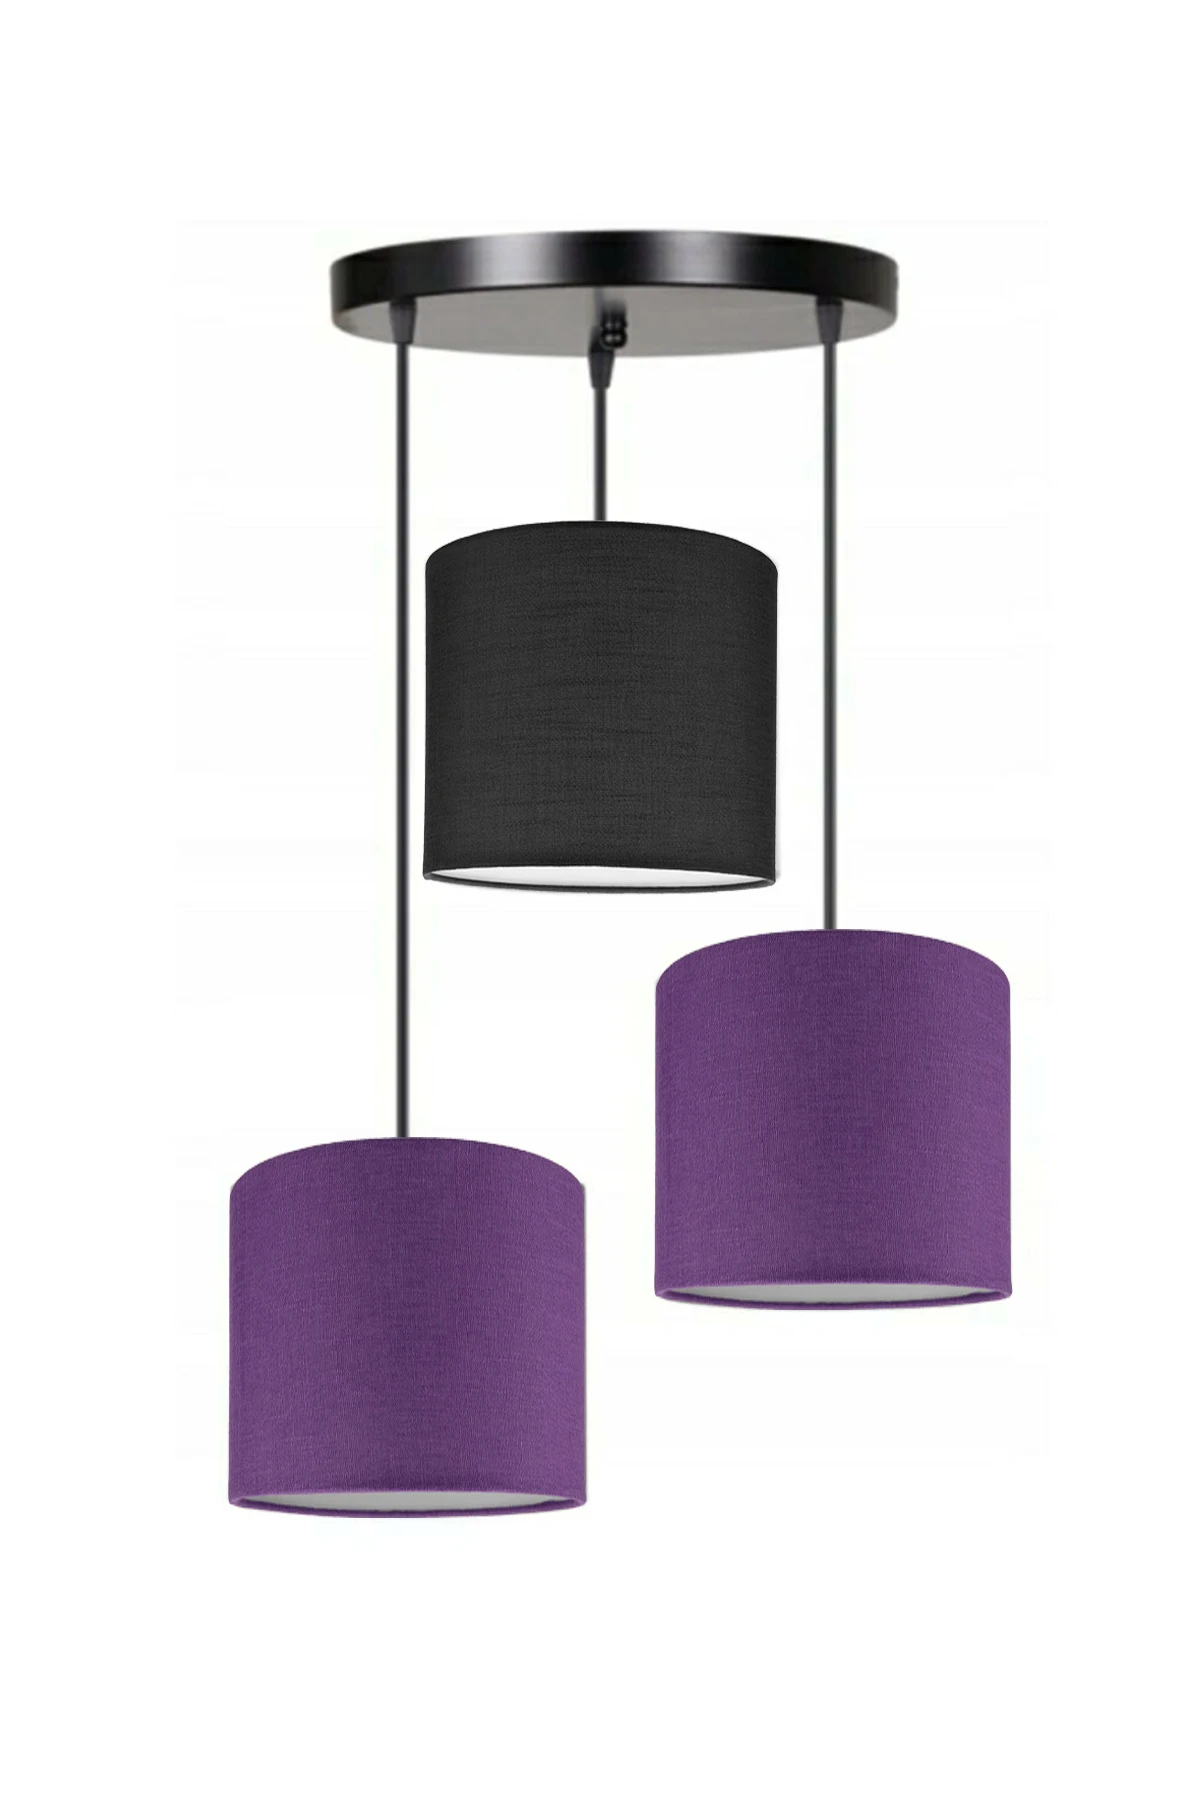 3 Heads 2 Purple 1 Black Cylinder Fabric Lampshade Pendant Lamp Chandelier Modern Decorative Design For Home Hotel Office Use